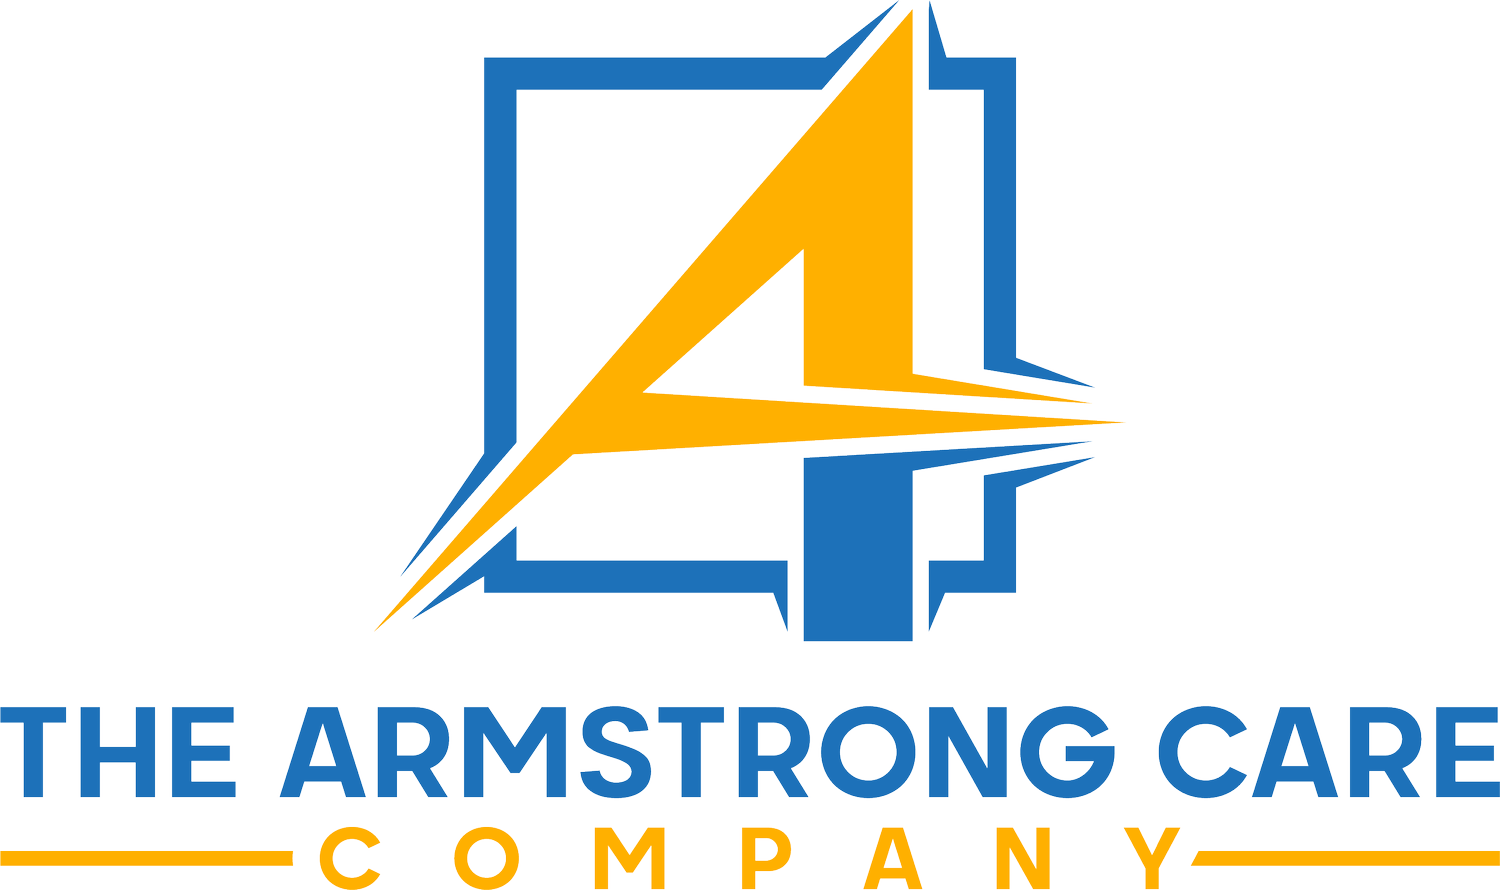 THE ARMSTRONG CARE COMPANY